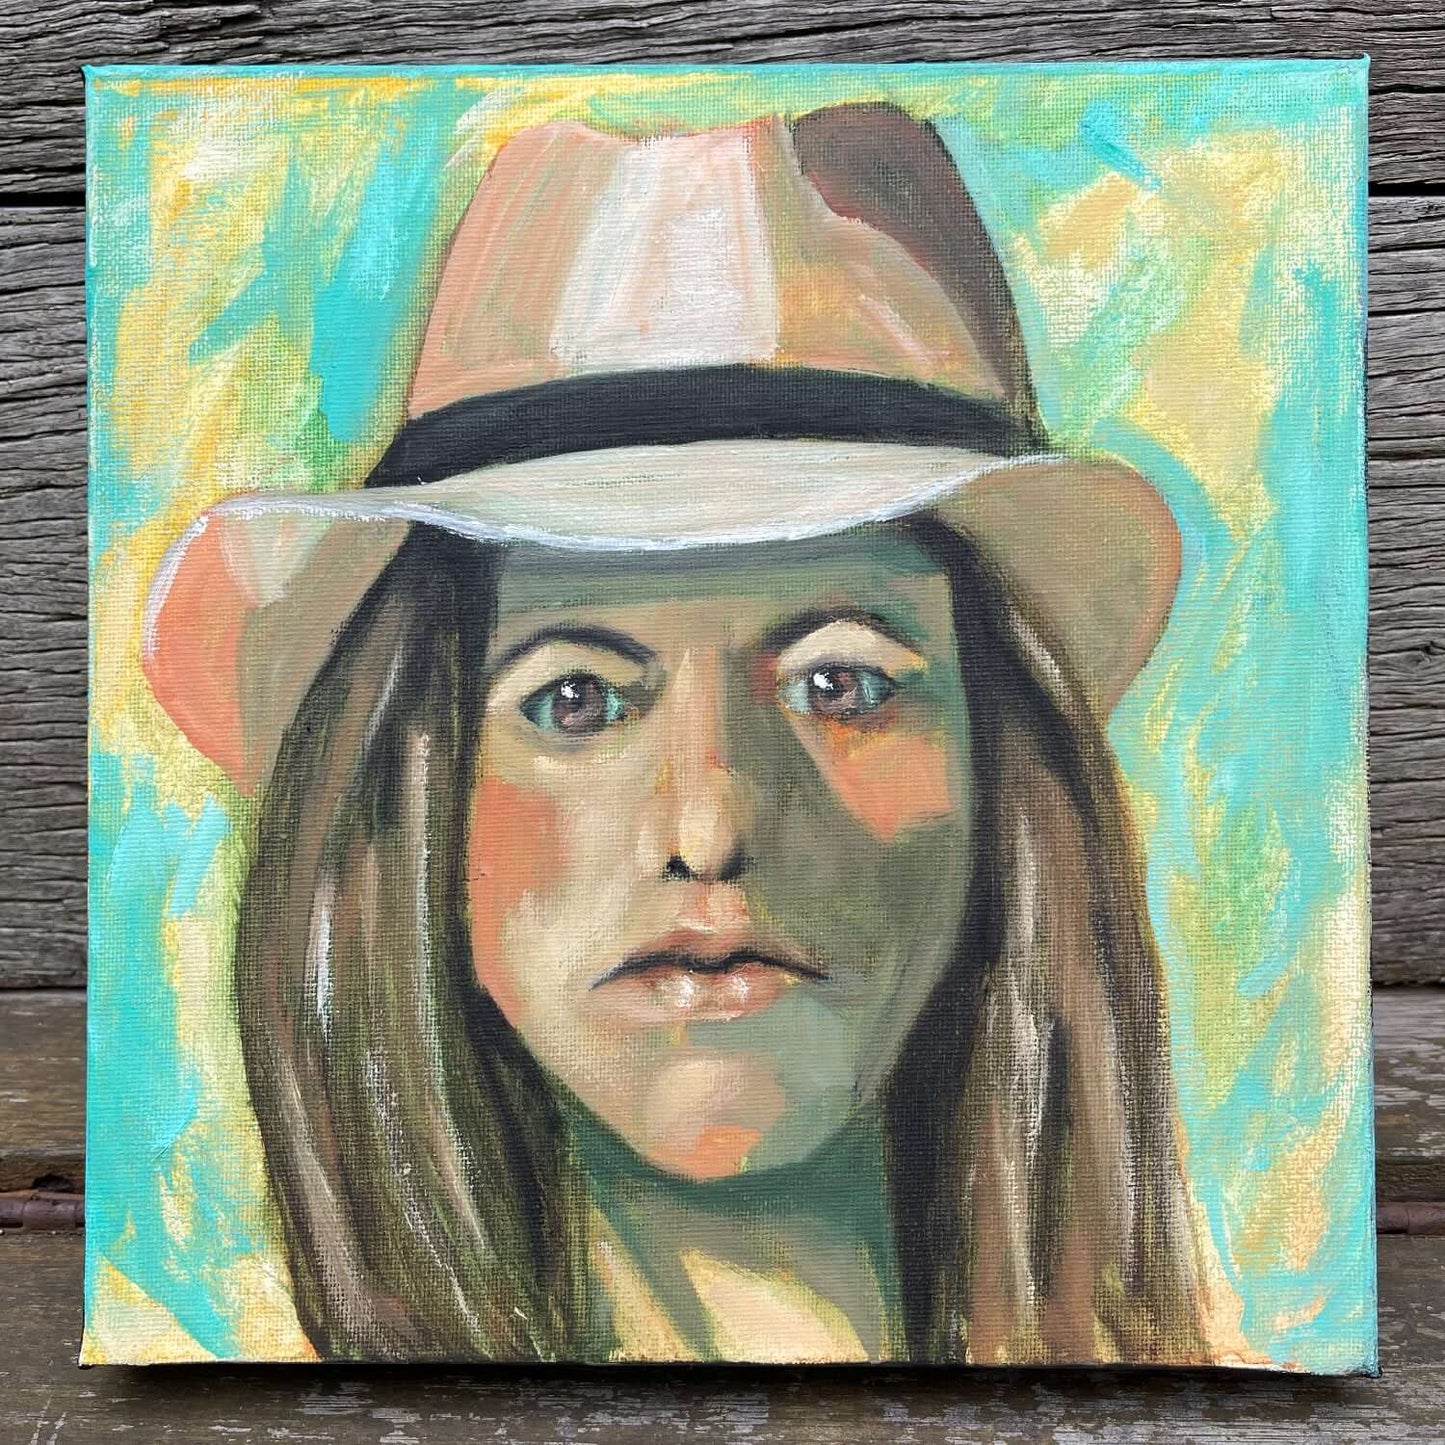 Original Oil Painting Portrait of a Woman, Teal, Peach & Brown, 10" x 10" Painting on Canvas